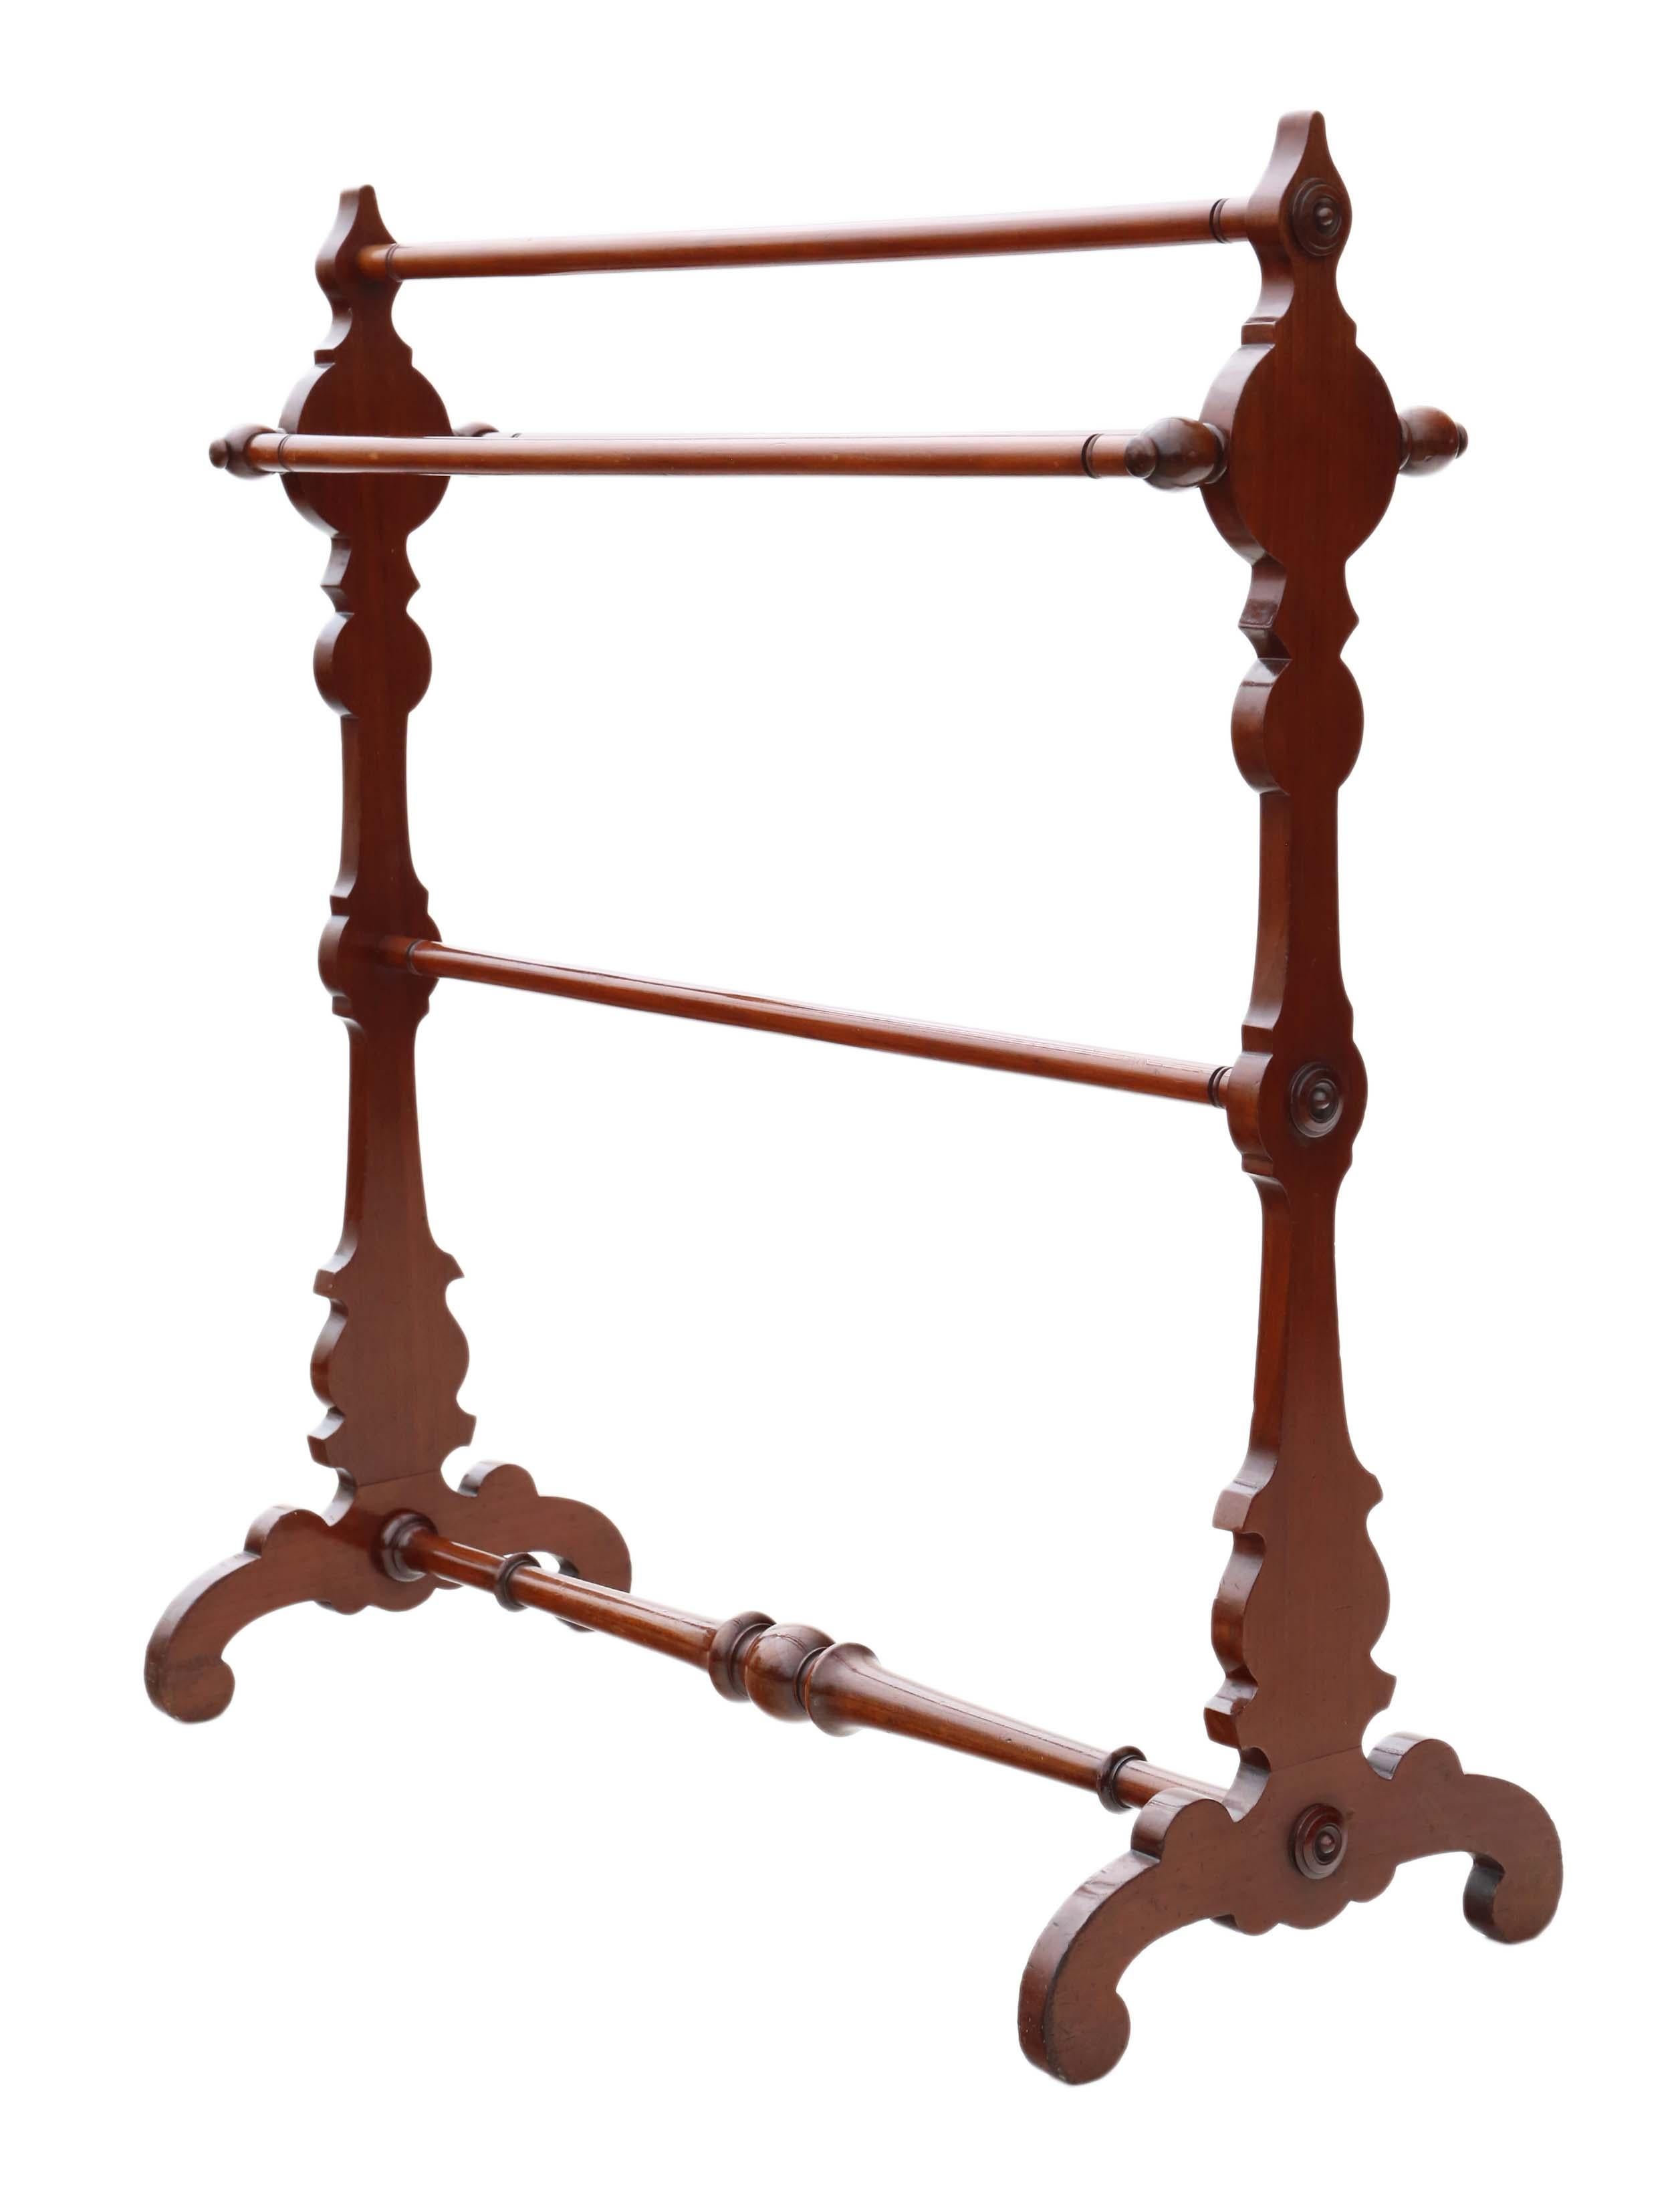 Antique fine quality Victorian circa 1890 mahogany towel rail stand. Much better than most.
This item is solid and strong, with no loose joints.
No woodworm.
Would look amazing in the right location!
Overall maximum dimensions:
79cmW x 33cmD x